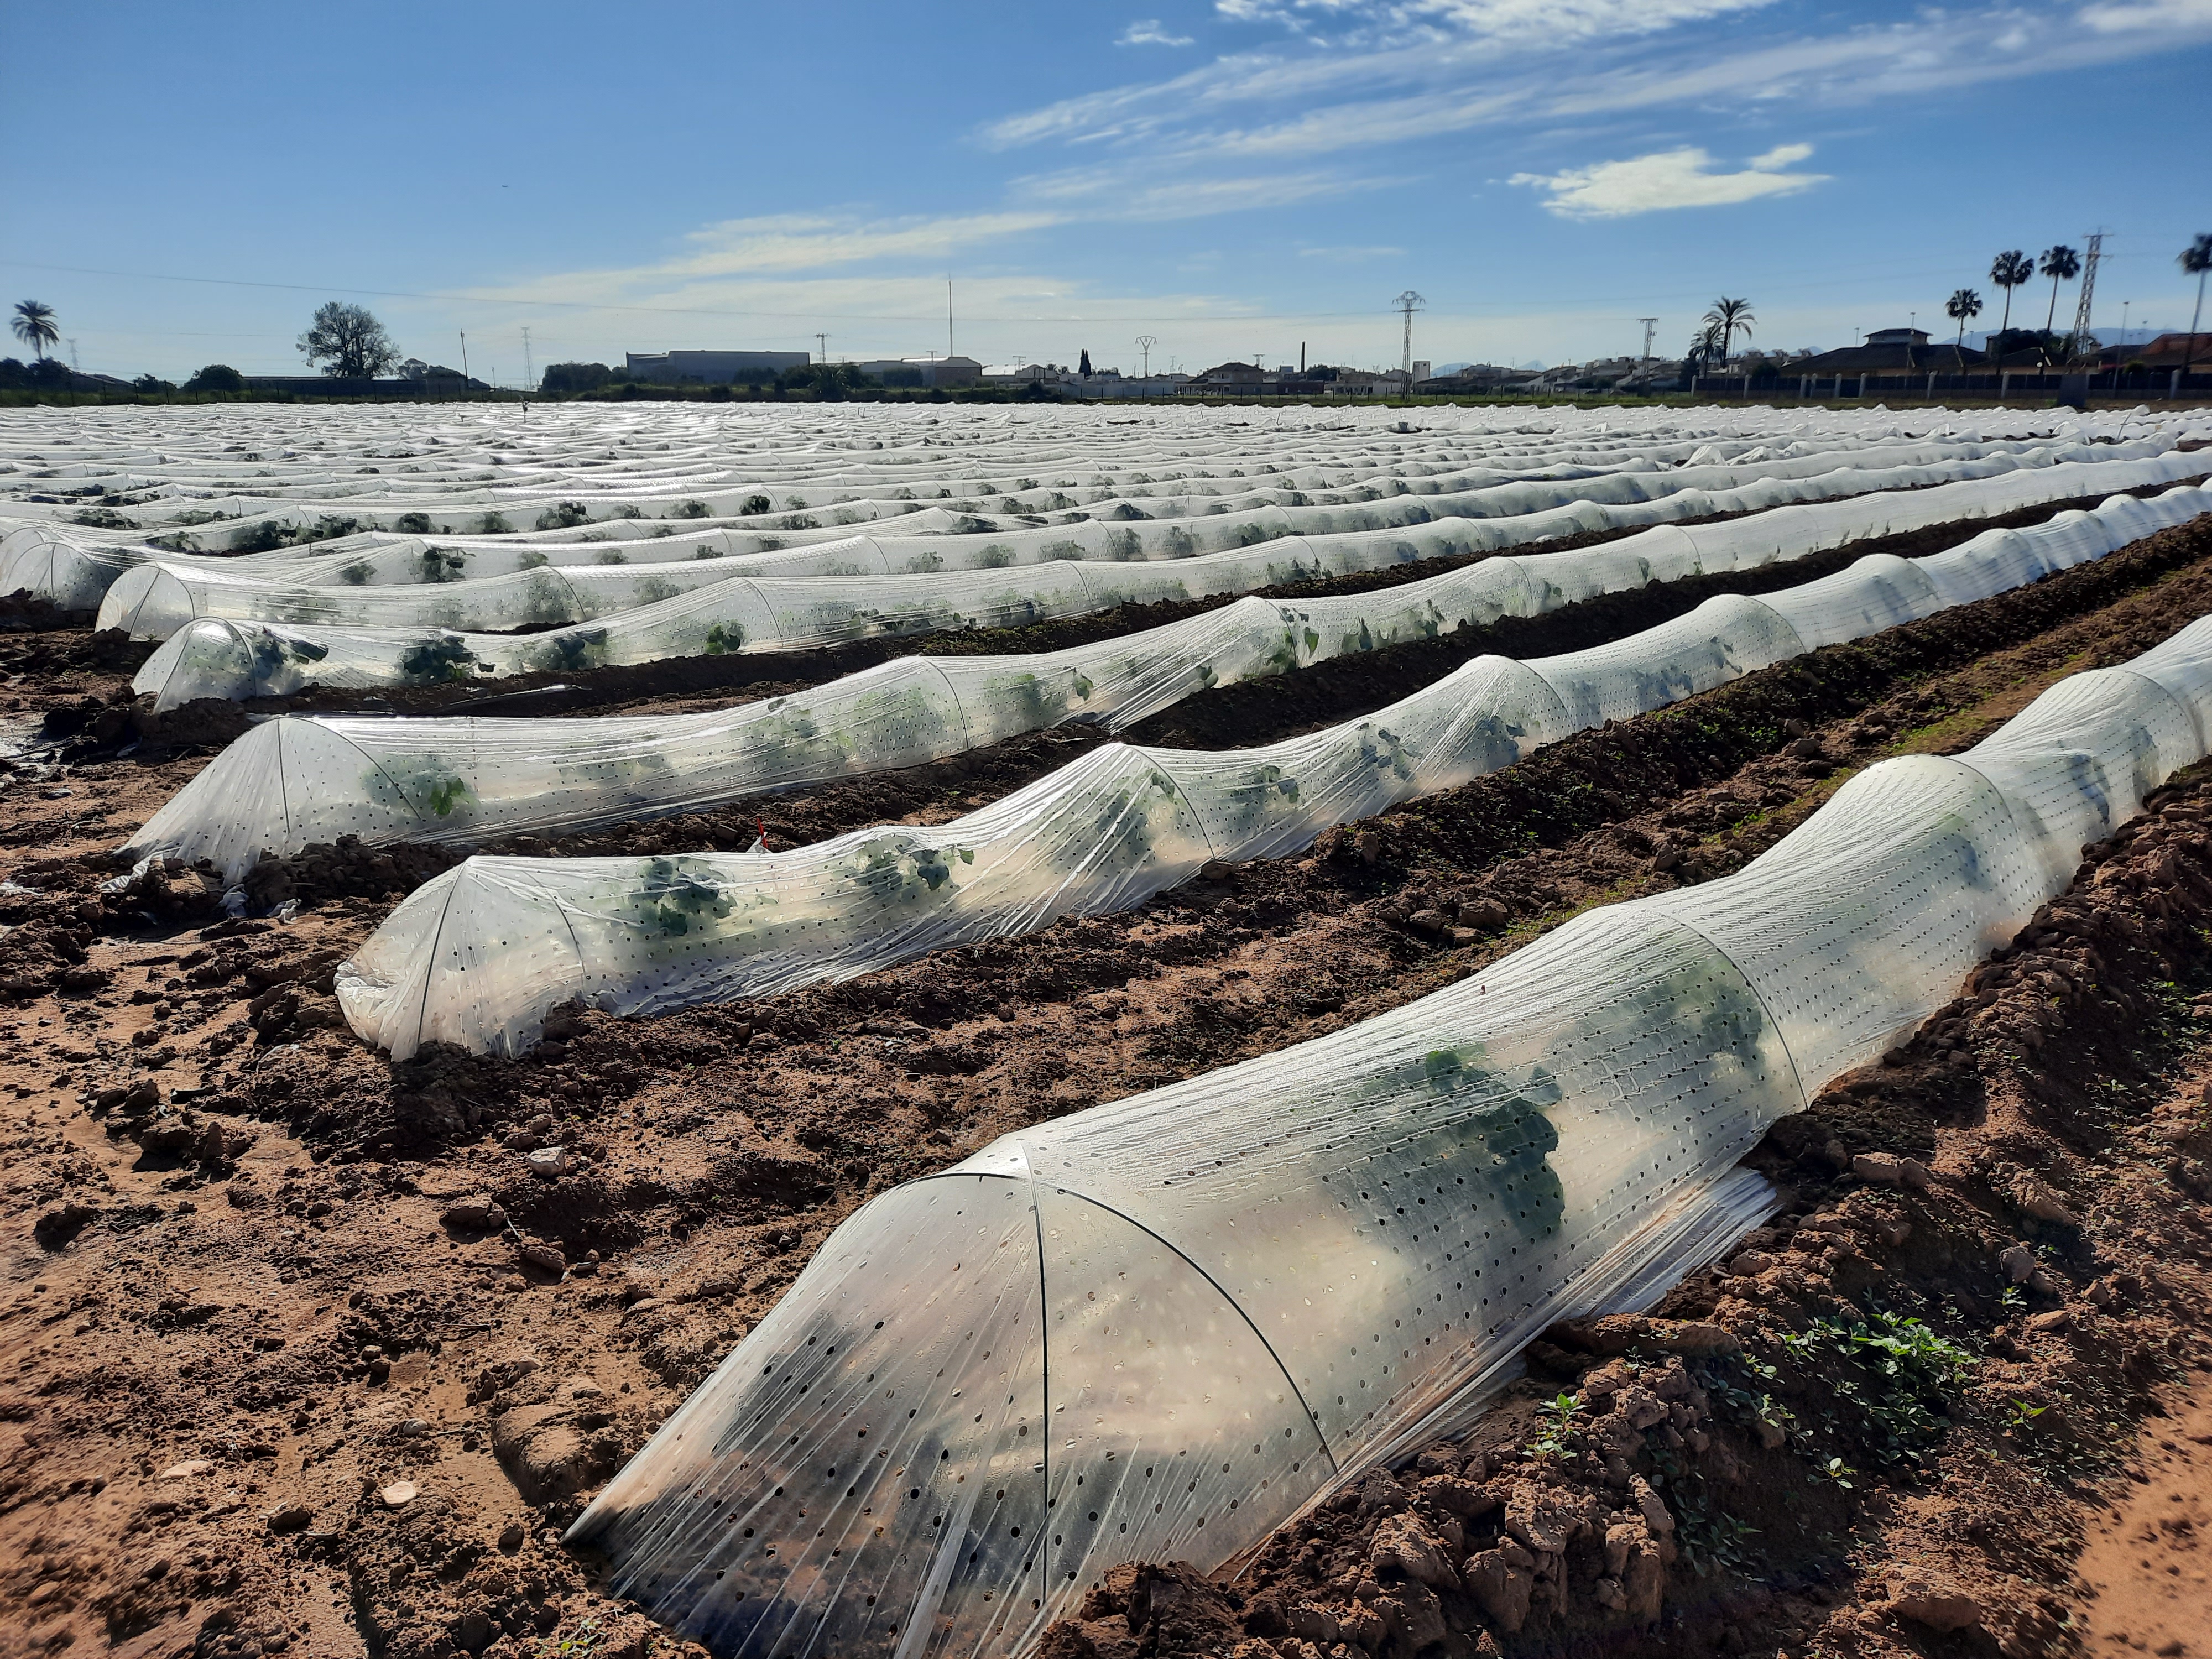 fields-in-la-palma-(murcia)-with-melons-with-a-cover-to-protect-the-plants-from-low-temperatures.jpg